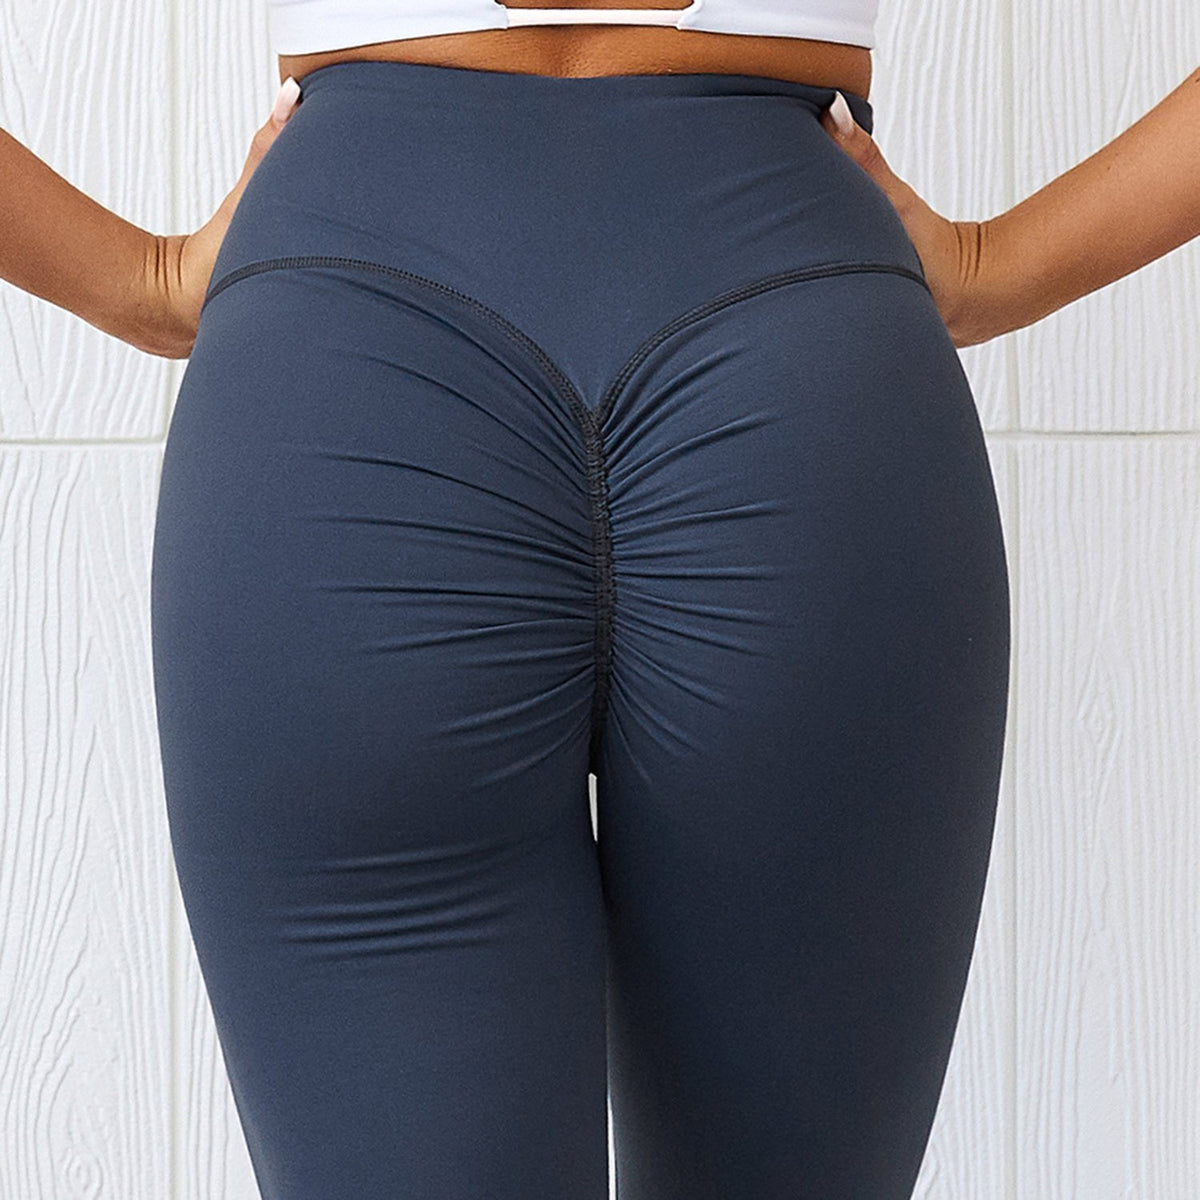 How to Design Double-Sided Shampooed Nude Yoga Pants for Women European and  American High Waist Lift Peach Butt Exercise Pants for Women